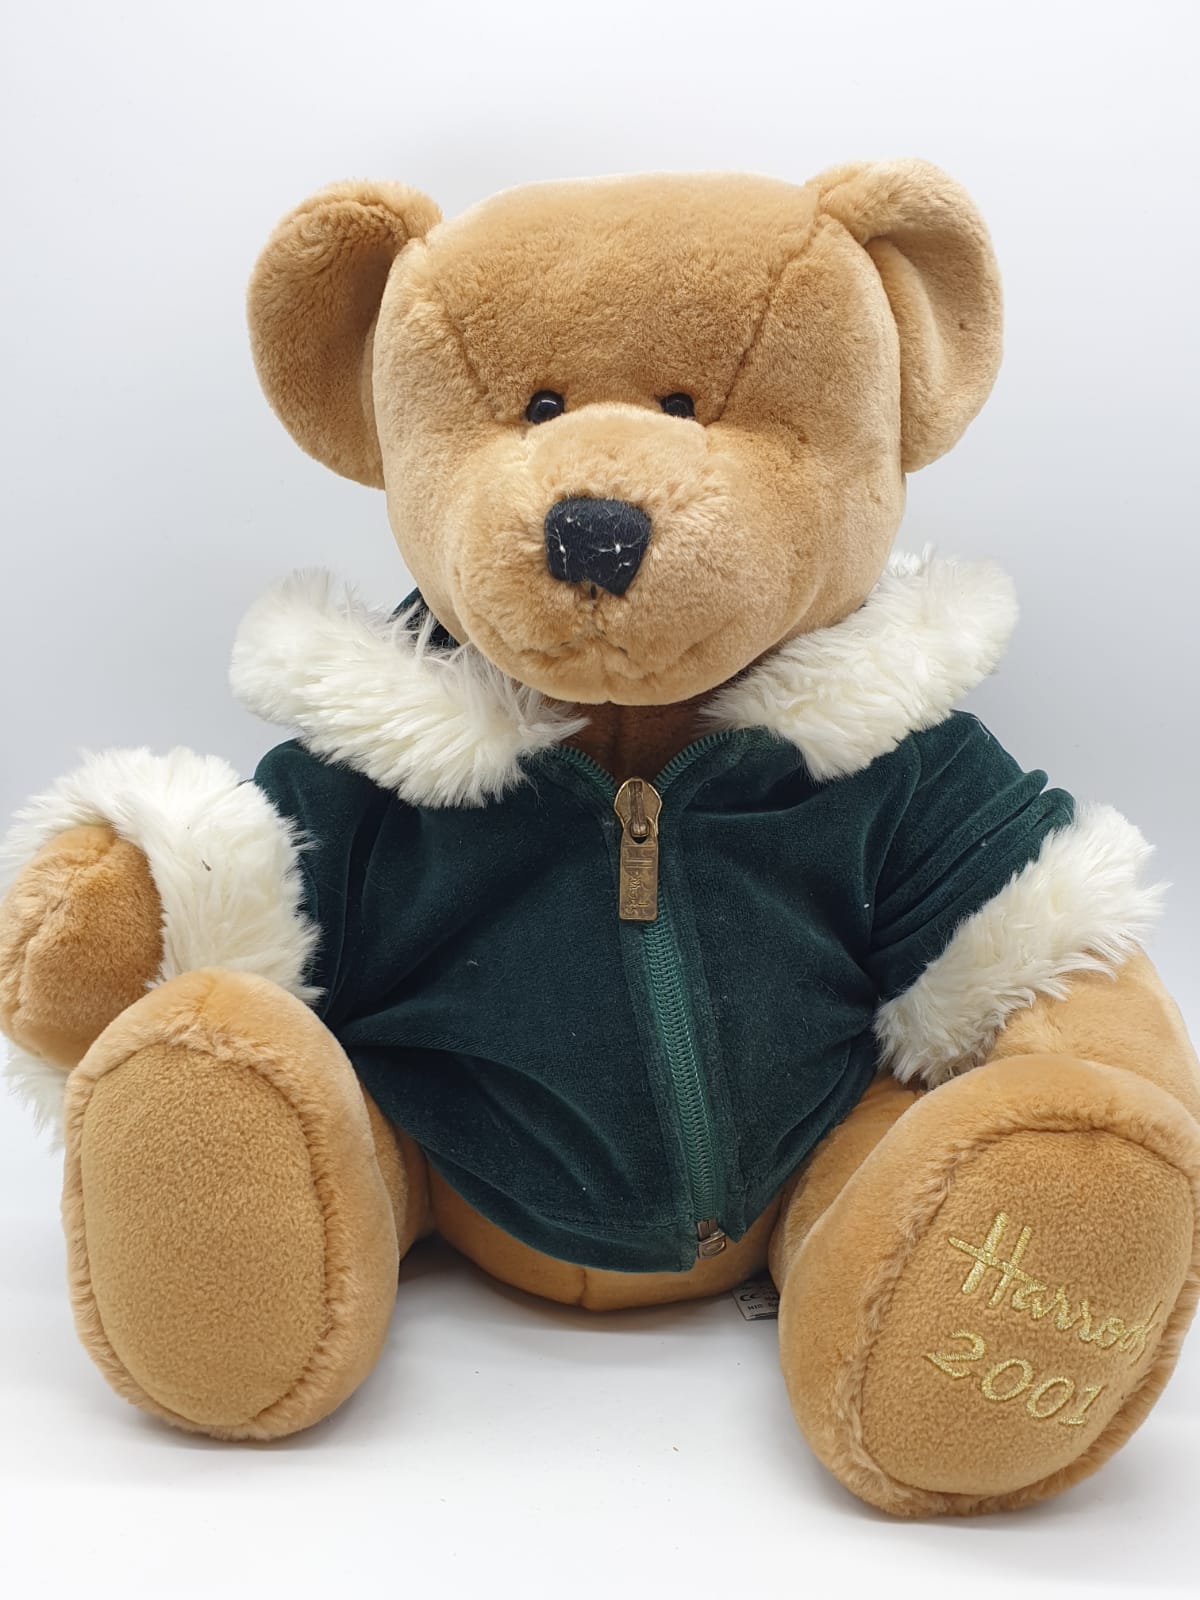 2 Harrods Teddy Bears 2001&2008 approx 40cms, very collectible - Image 5 of 21